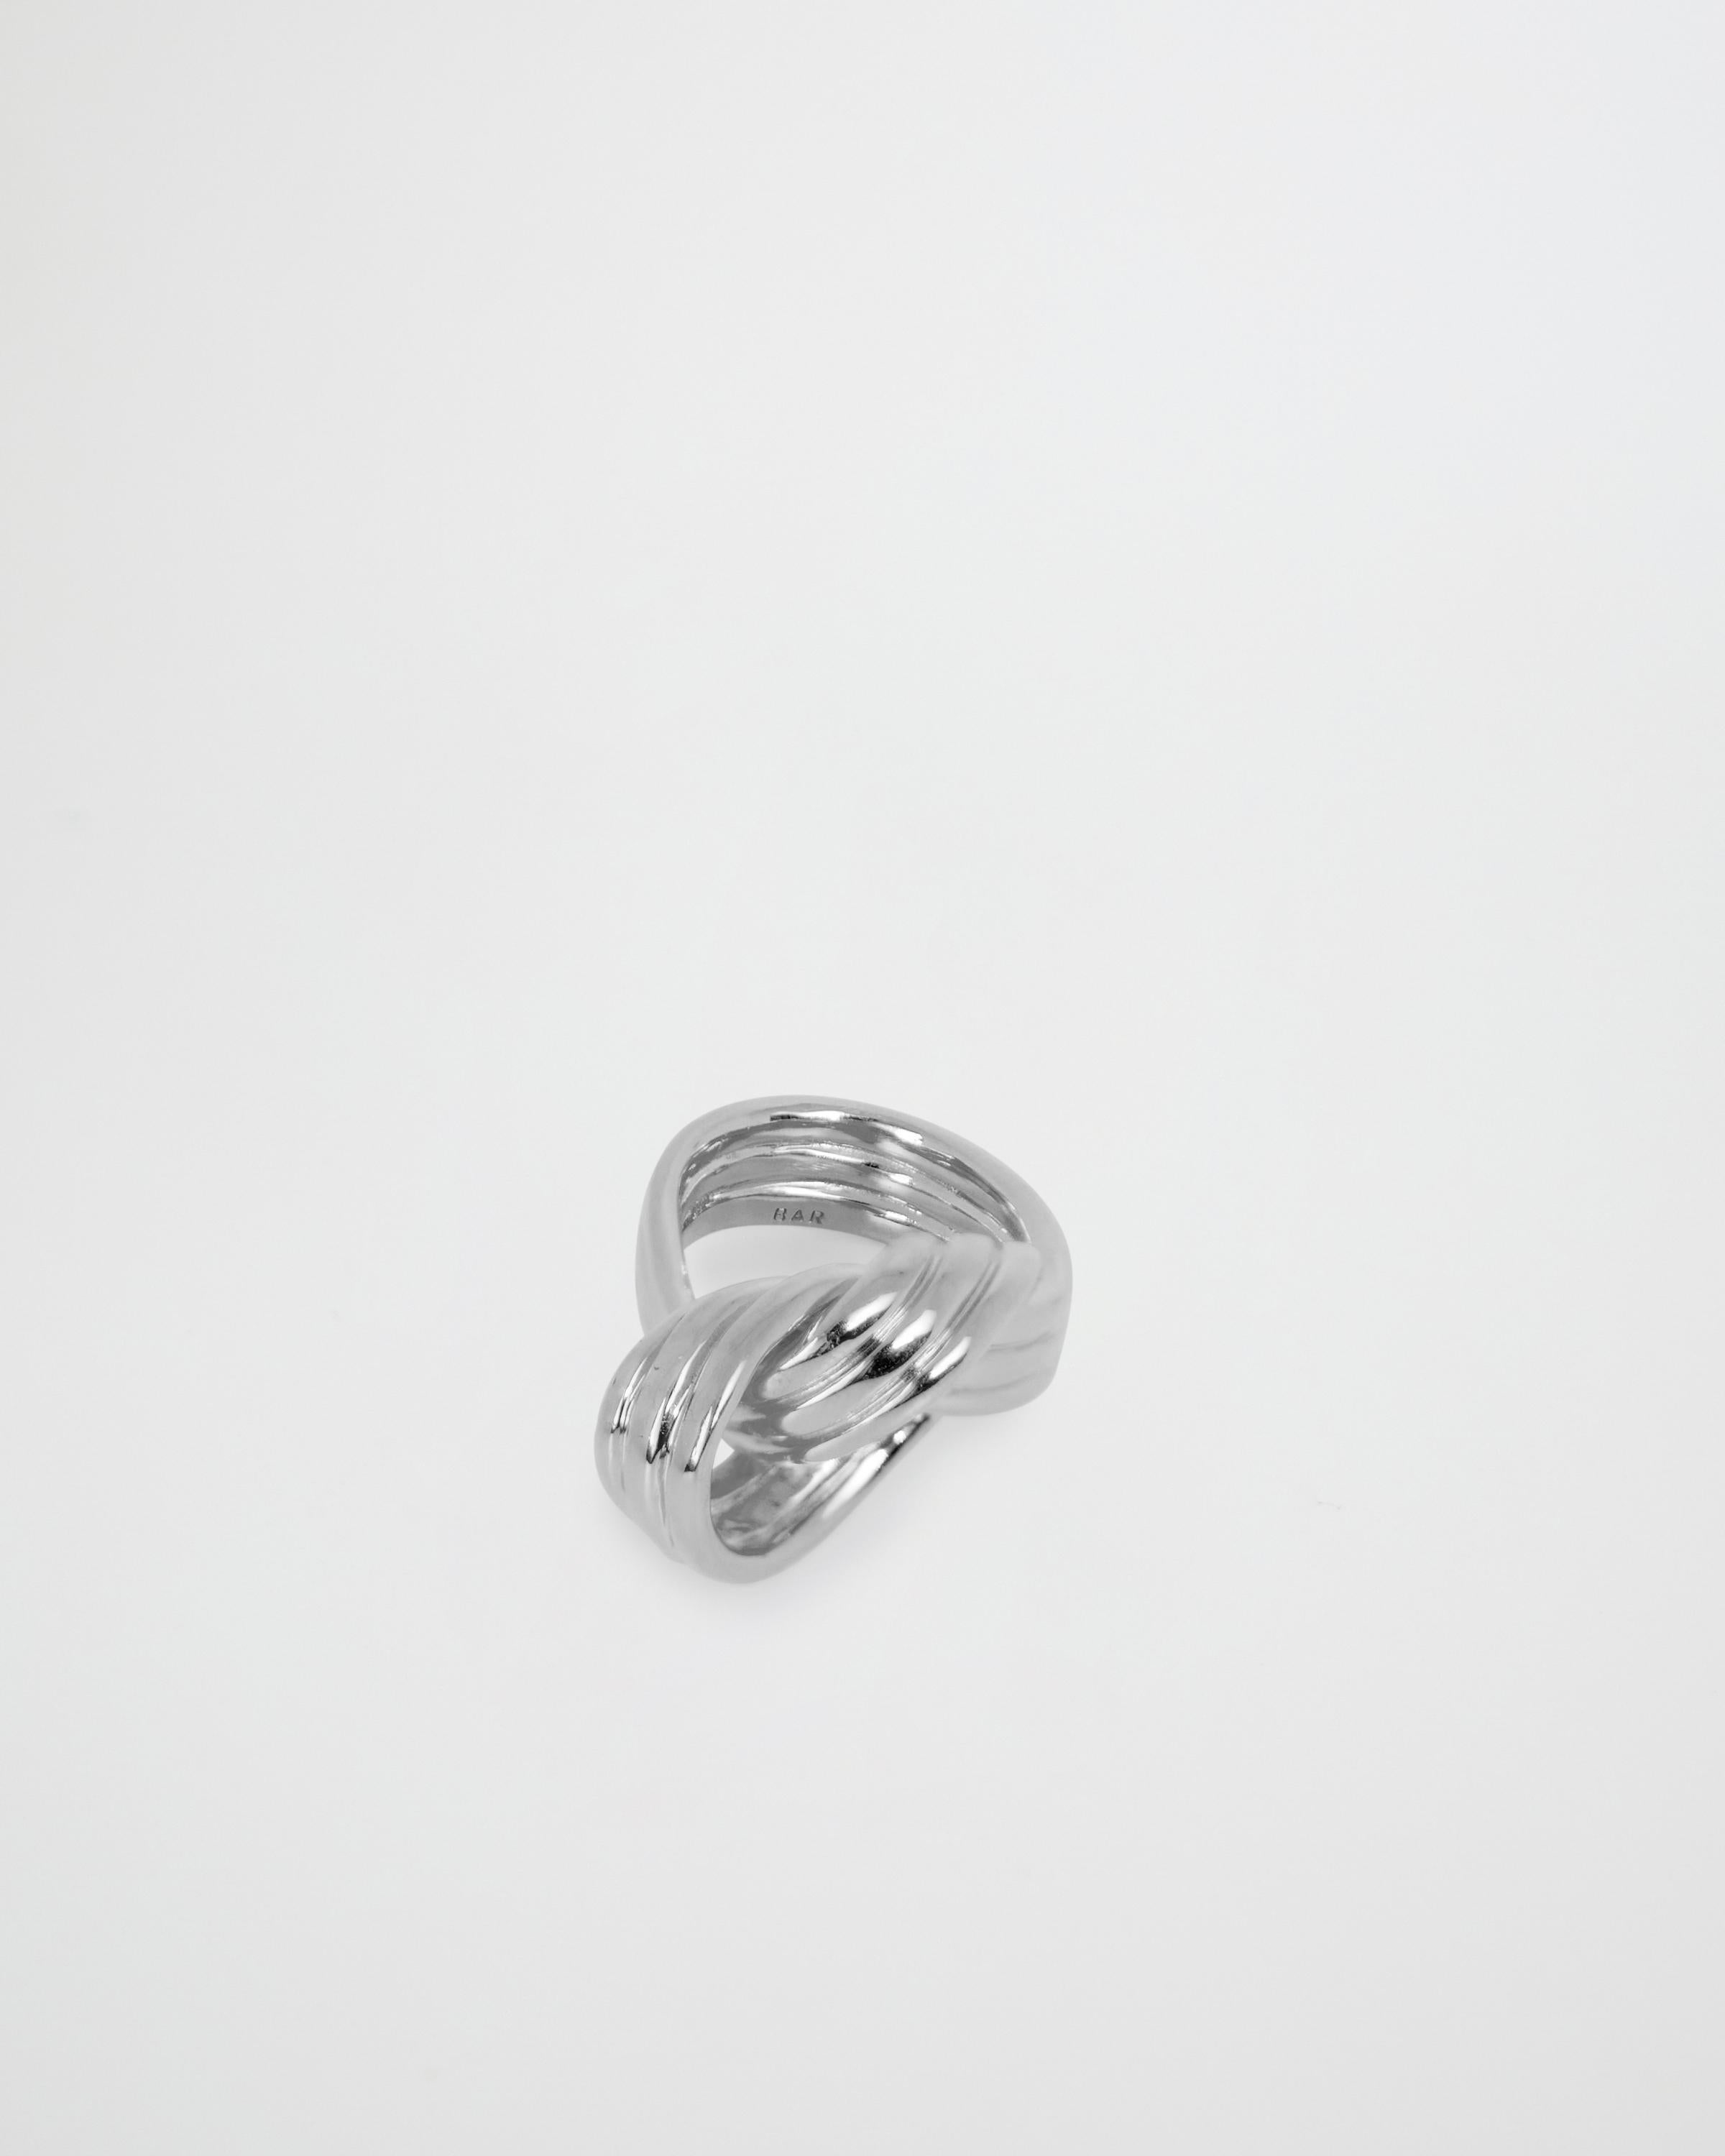 Women's or Men's 70s Inspired Braid Ring in Recycled Silver (Large) For Sale